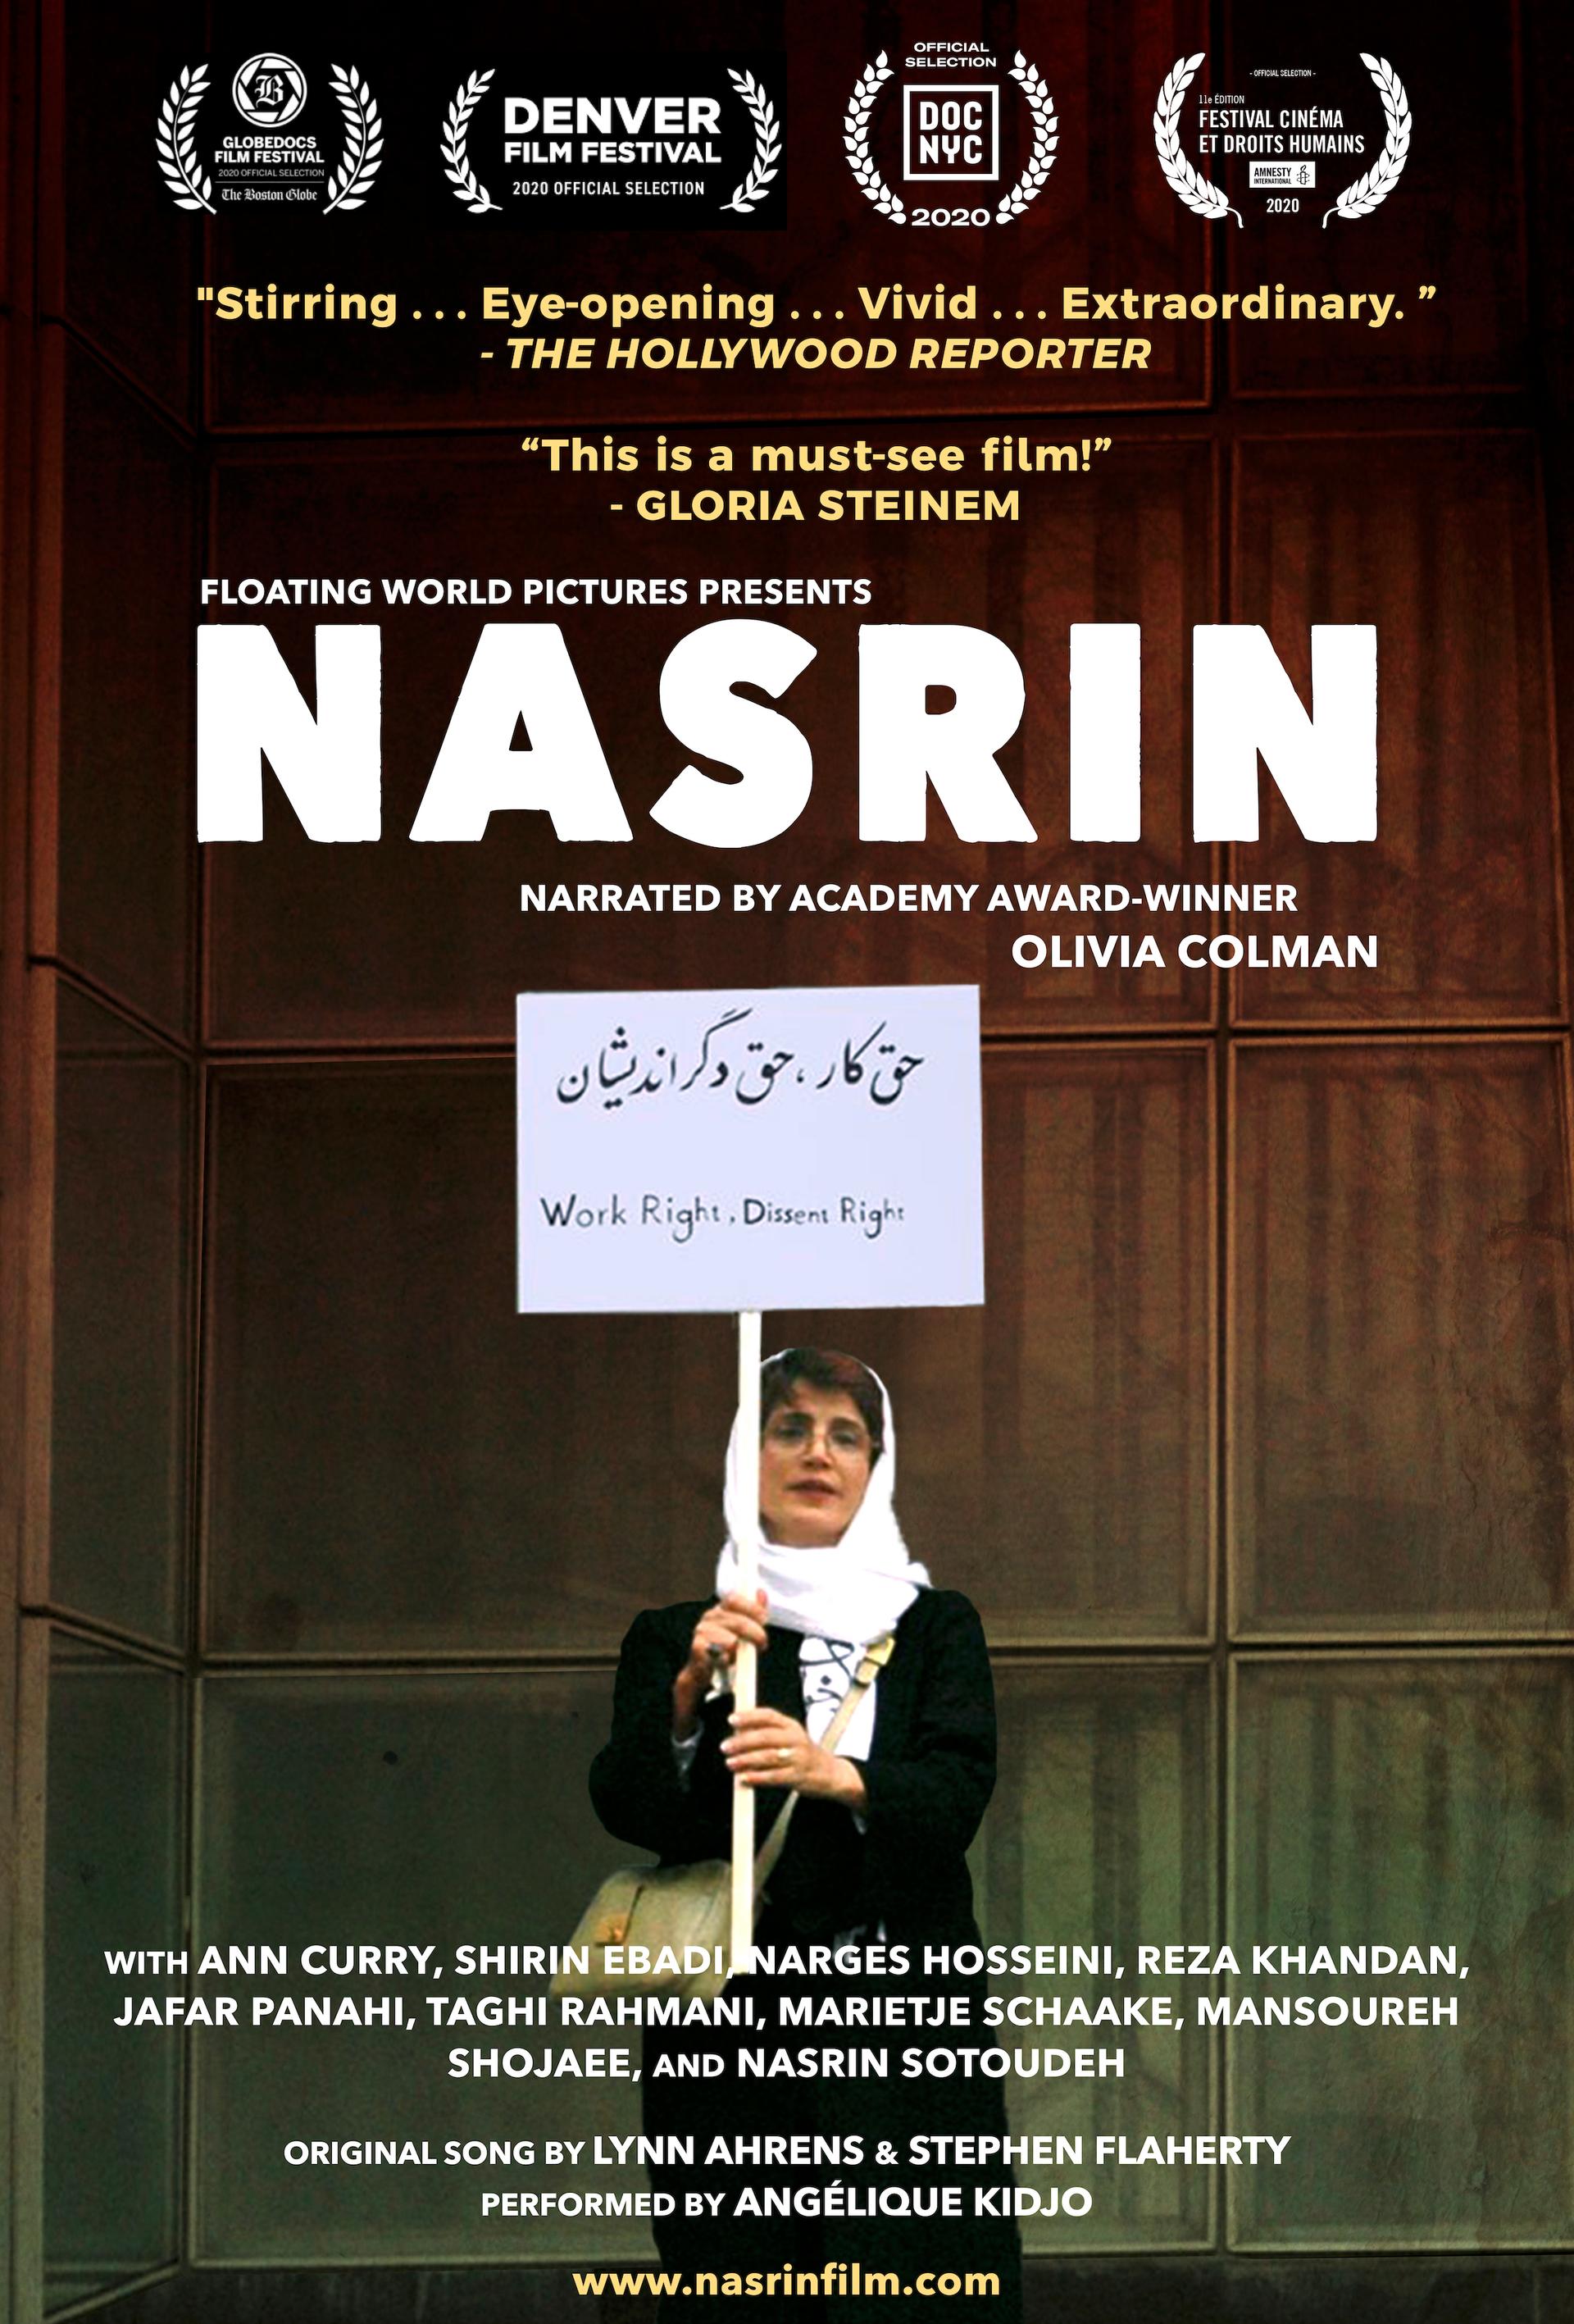 Nasrin Sotoudeh holds a protest sign in Tehran in a scene from the film 